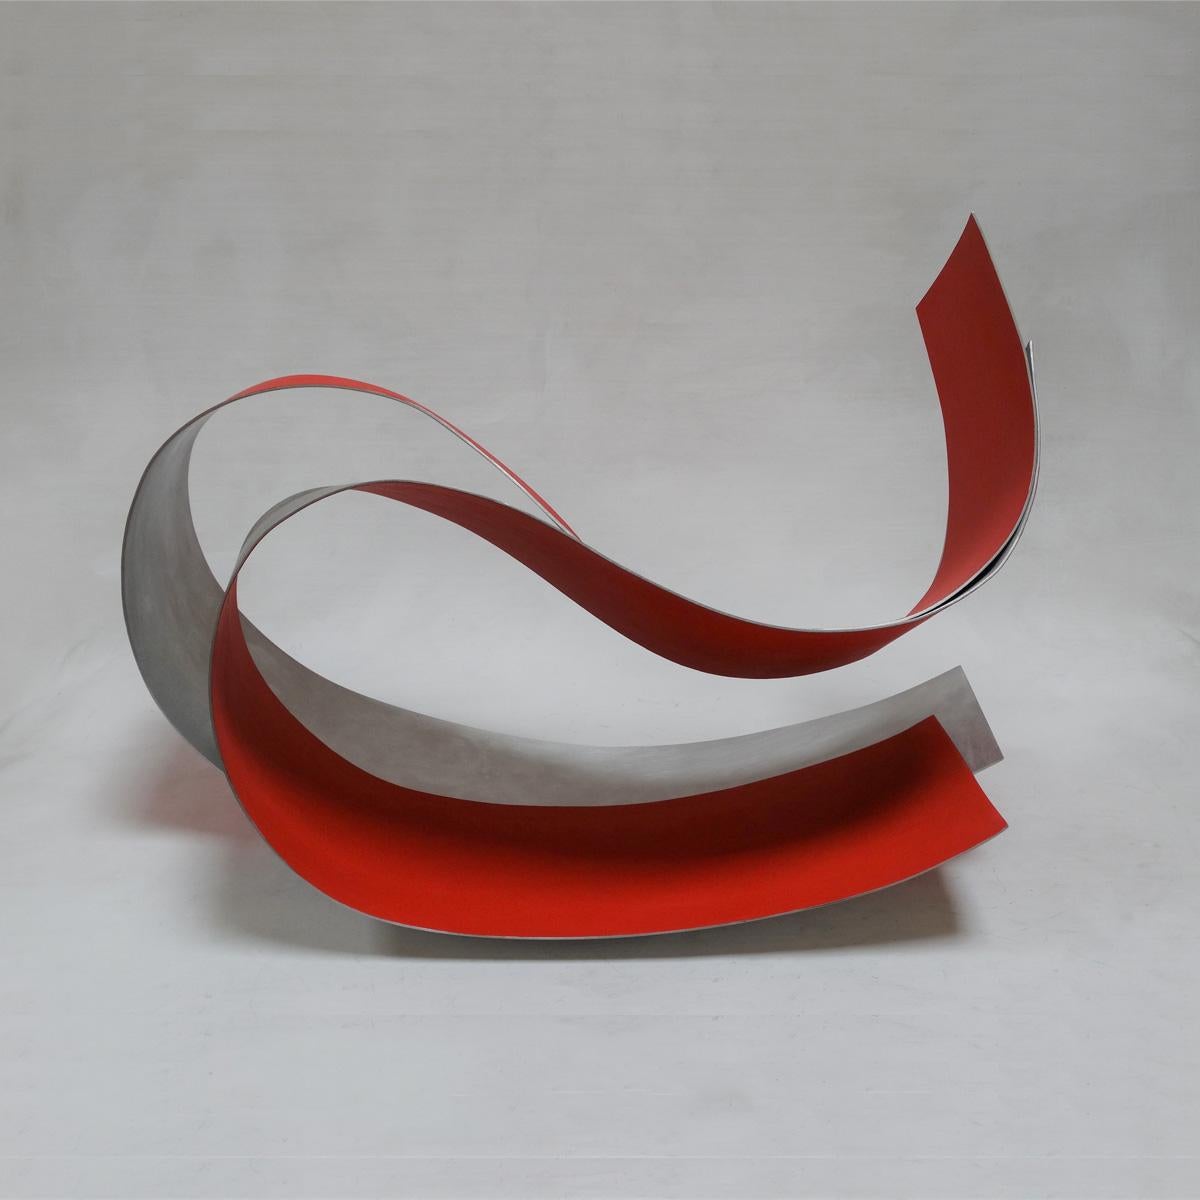 Acull 46 - Abstract, Outdoor Sculpture, Contemporary, Art, Red, Rafael Amorós For Sale 4